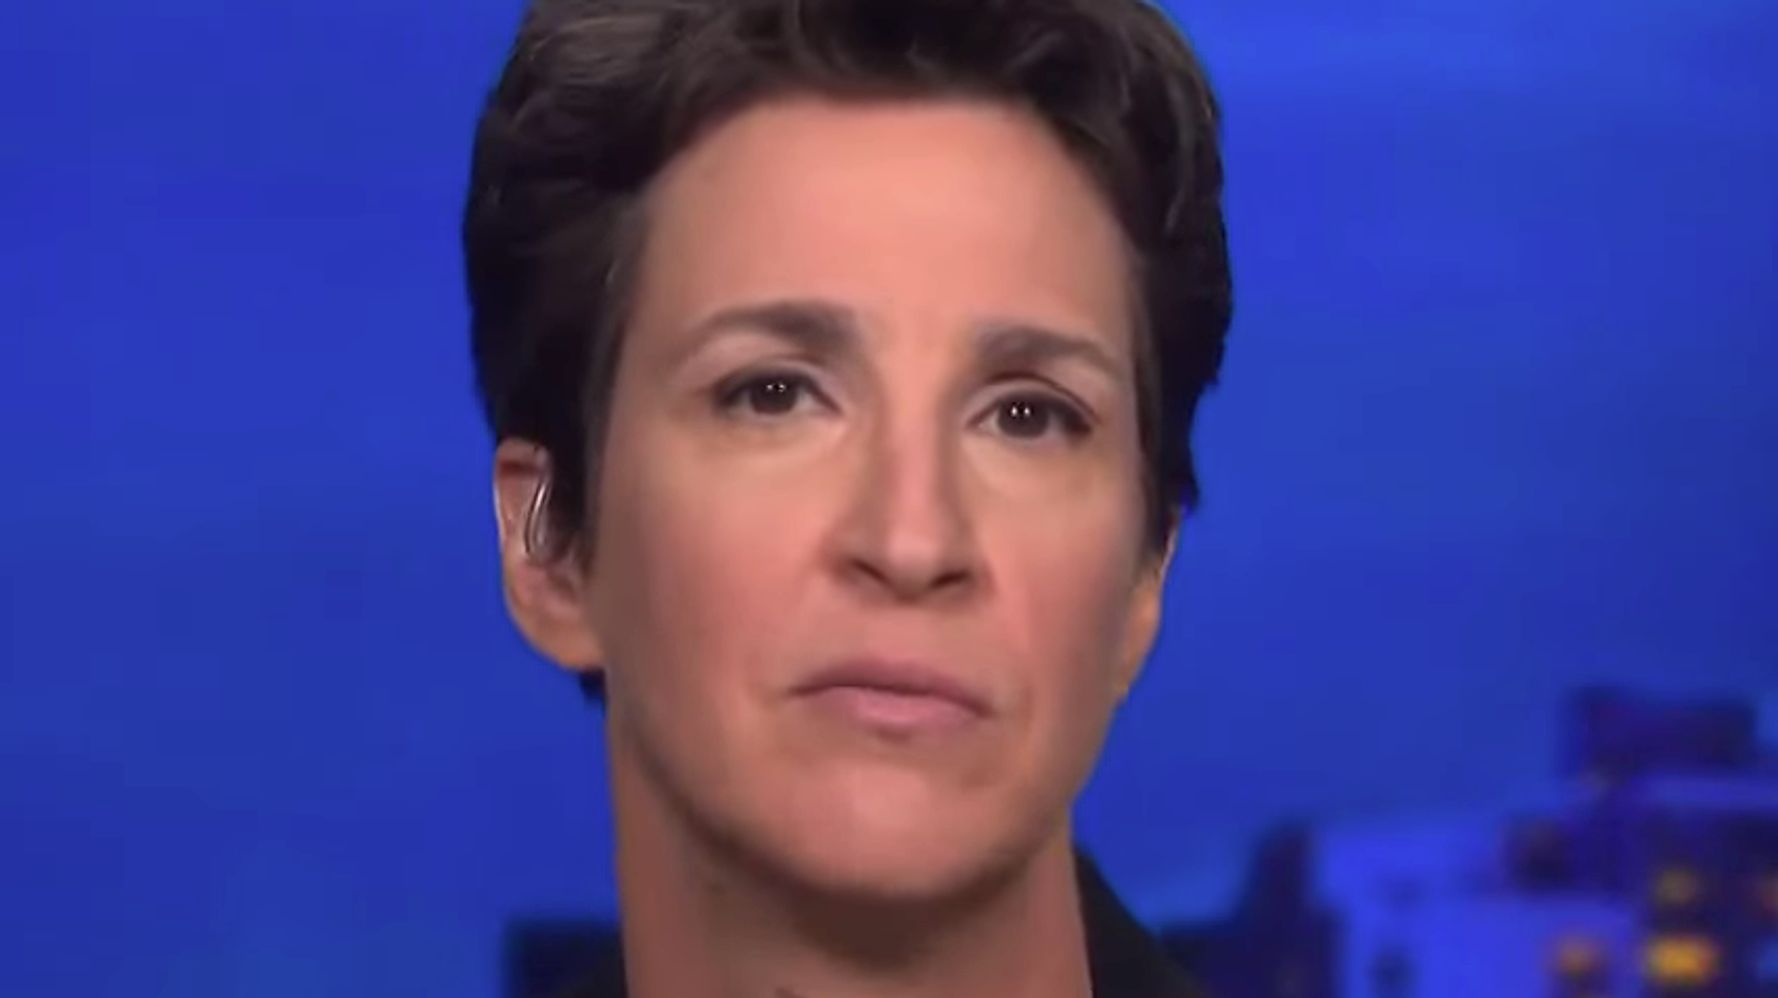 Rachel Maddow Warns What May Come Next From Donald Trump's Supporters